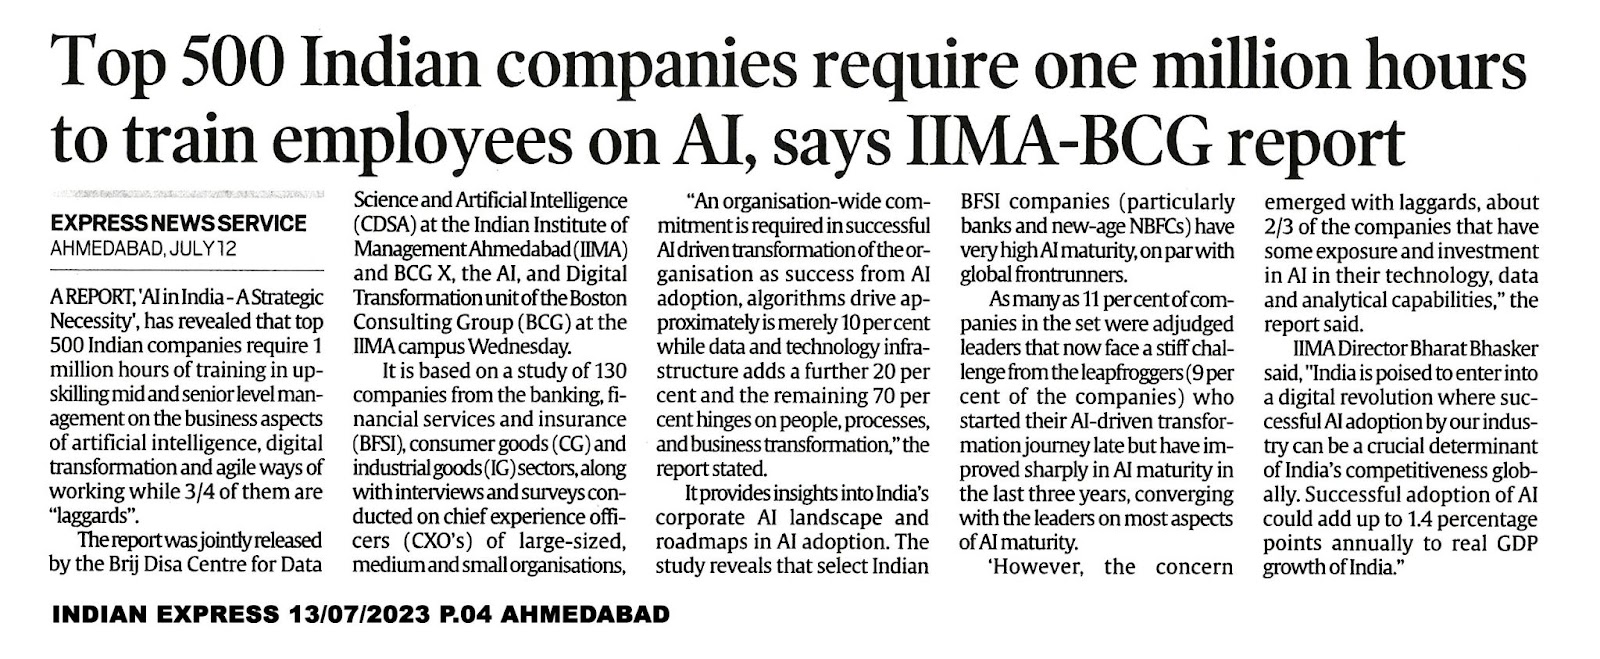 Top 500 Indian companies require one million hours to train employees on AI, say IIMA-BCG report